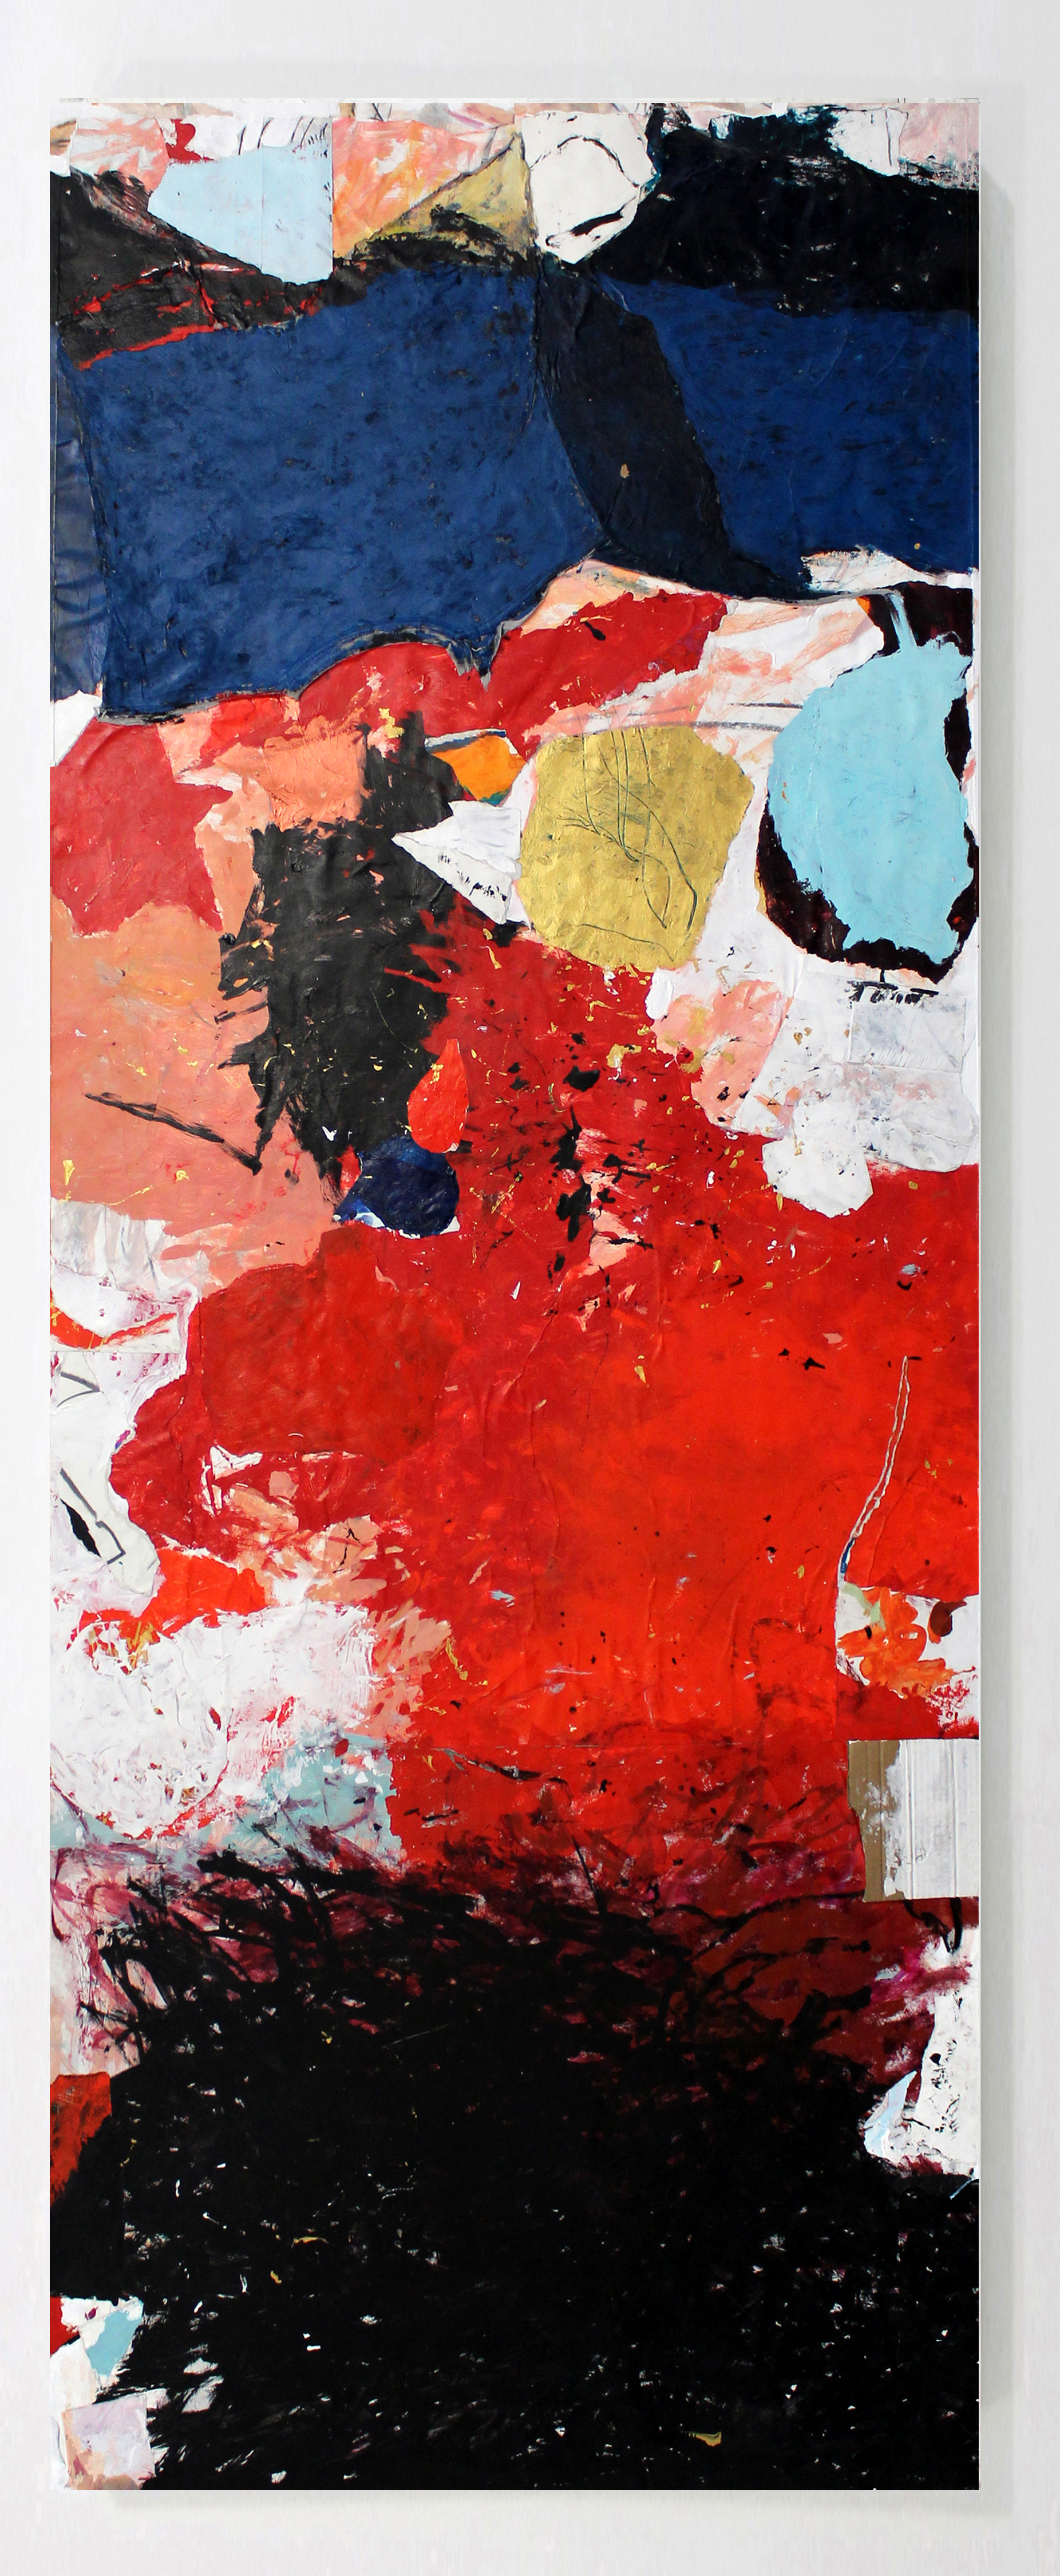  JOSEPH HART Example of Wounds, 2019 collaged paper, acrylic and graphite on paper 90" x 38” 